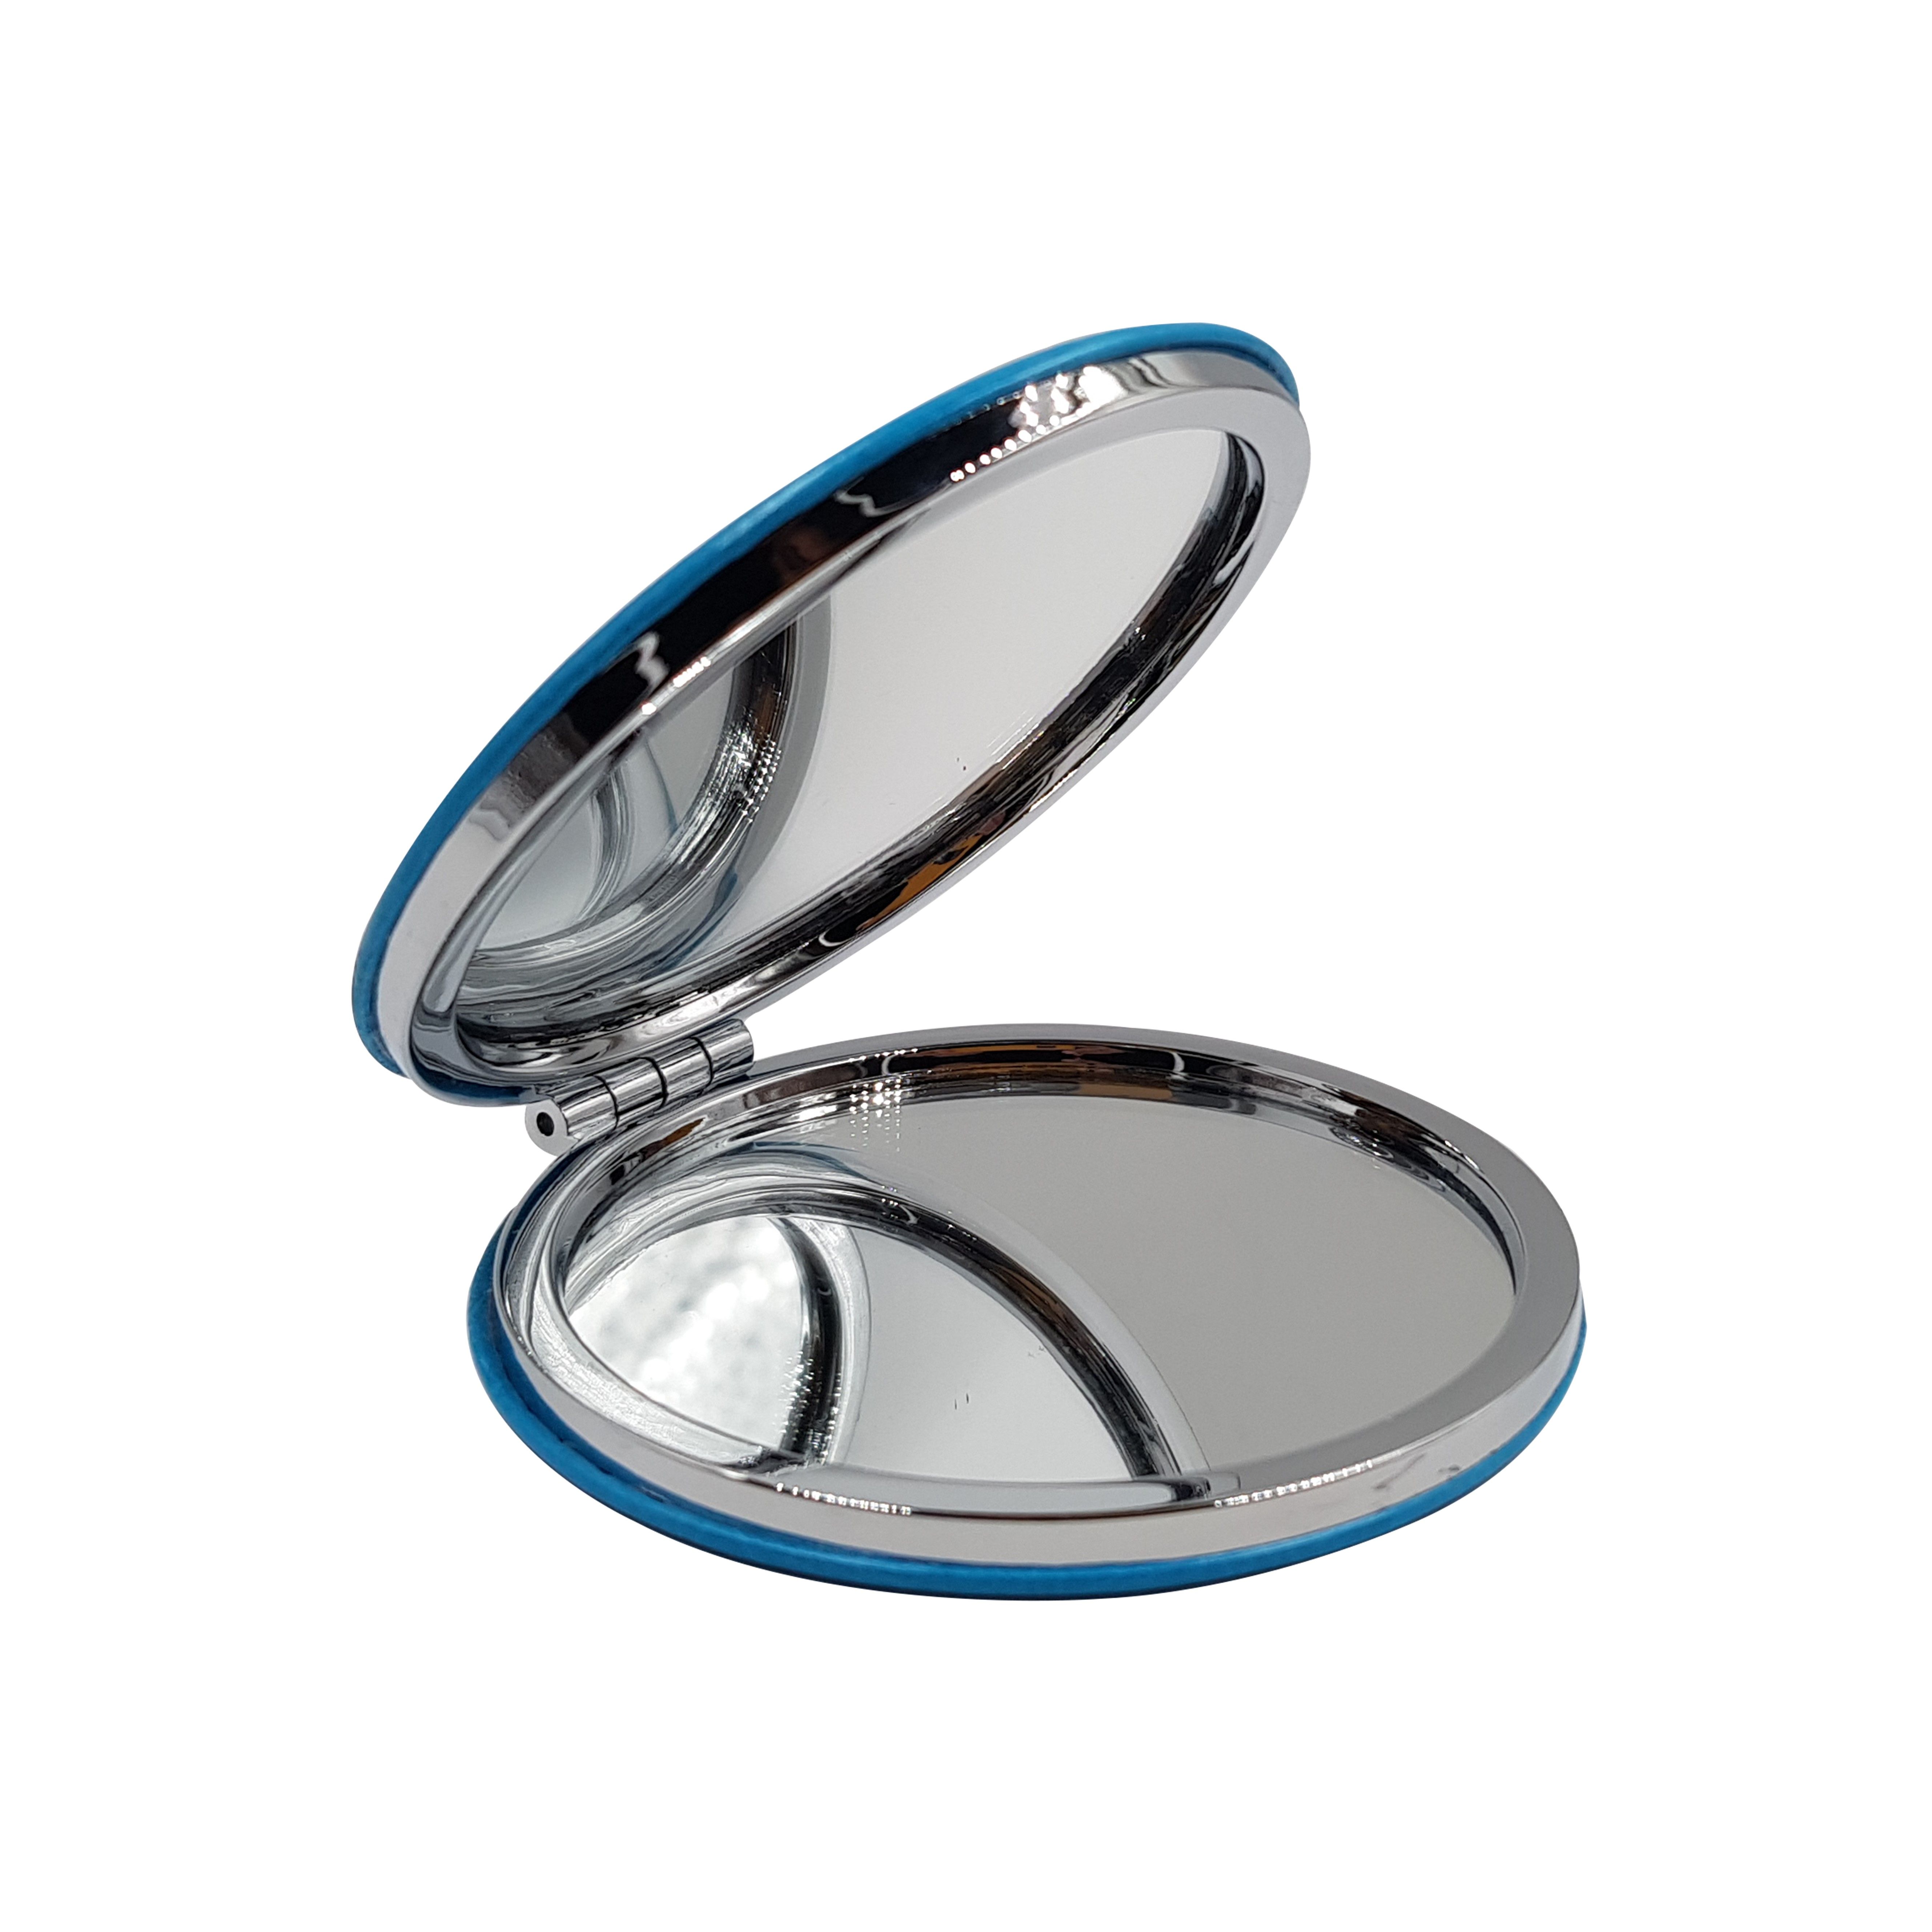 Majestique Compact Mirror - Round Pu 1x/2x Magnification-ultra Portable For Purses And Travel (Color May Vary)